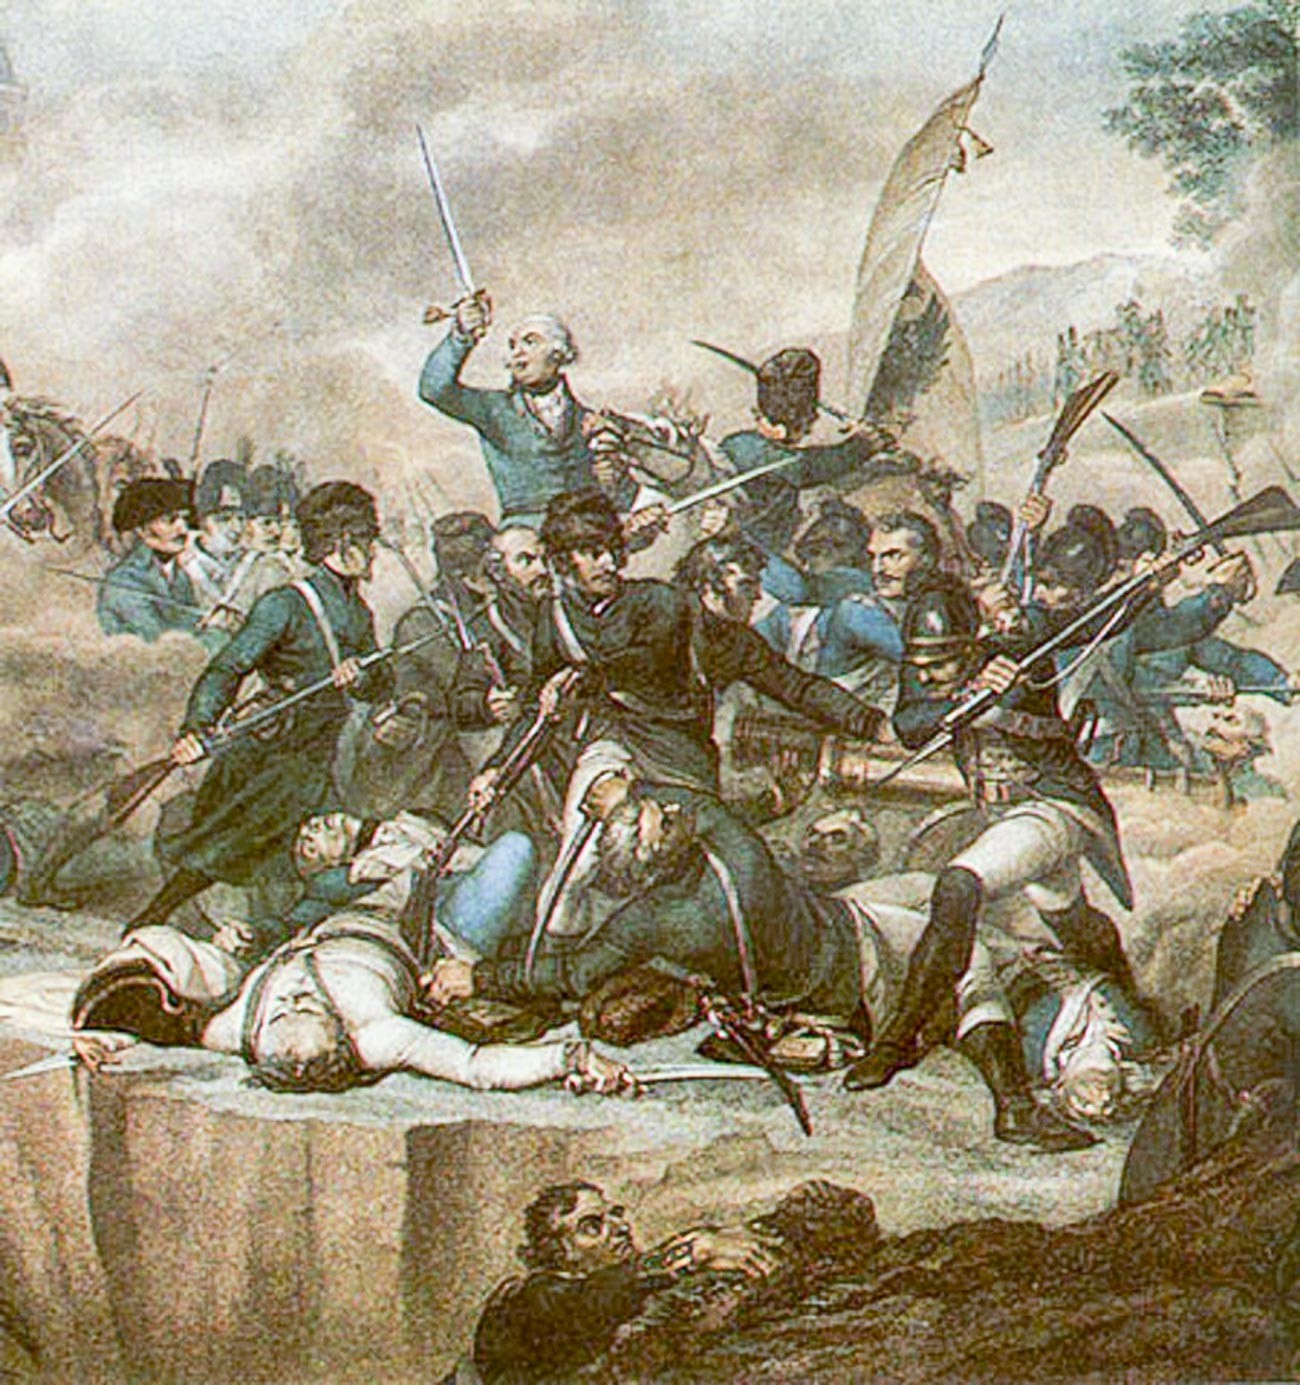 General Suvorov at the battle by river Adda on April 27, 1799.